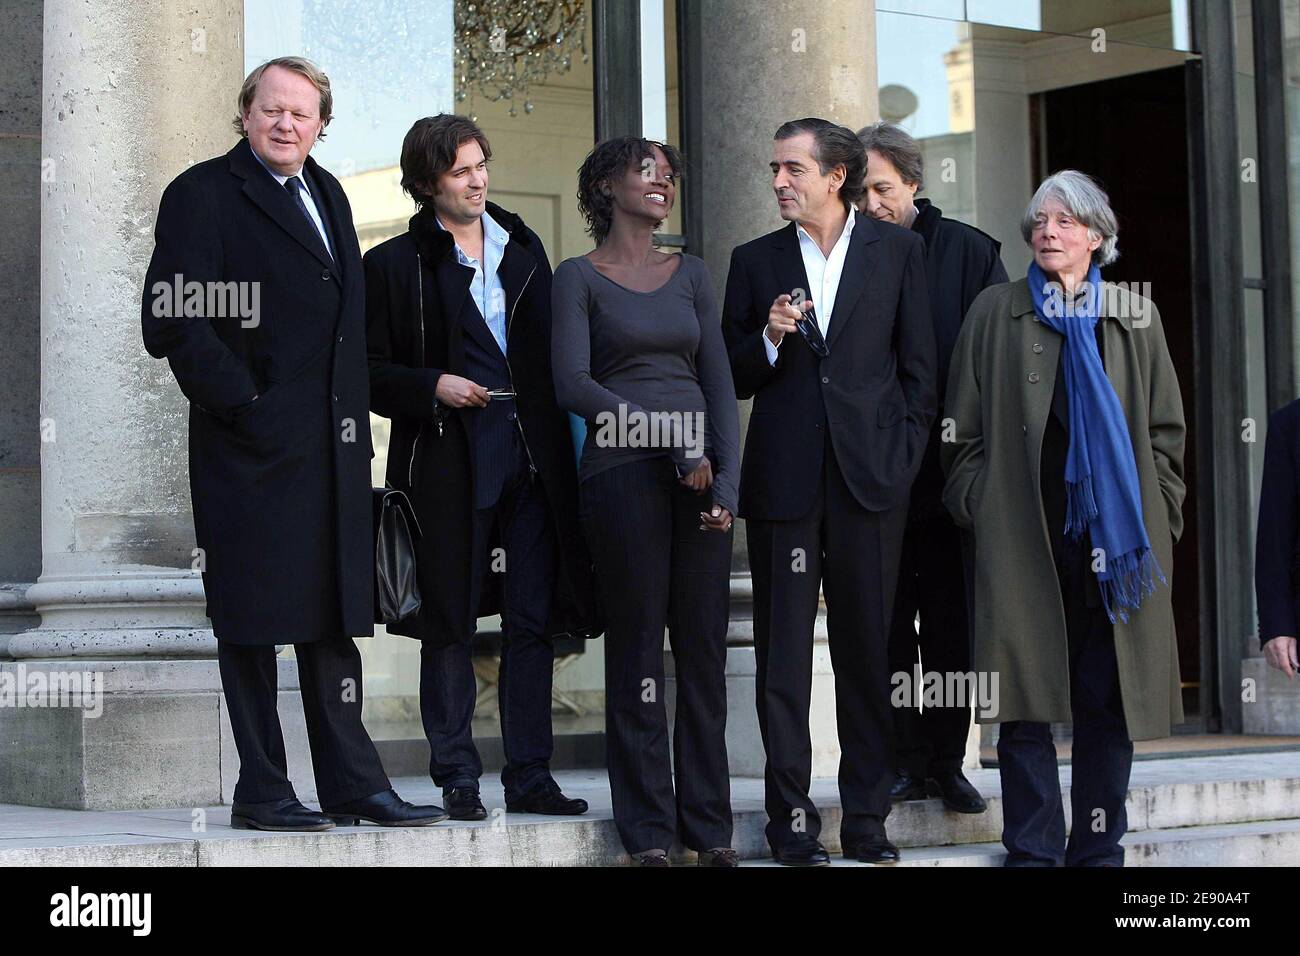 Ministers Rama Yade and Bernard Kouchner chat with Bernard Henri-Levy and  Andre Glucksmann after their meeting with President Sarkozy at Elysee  Palace in Paris, France on November 24, 2007 to speak about